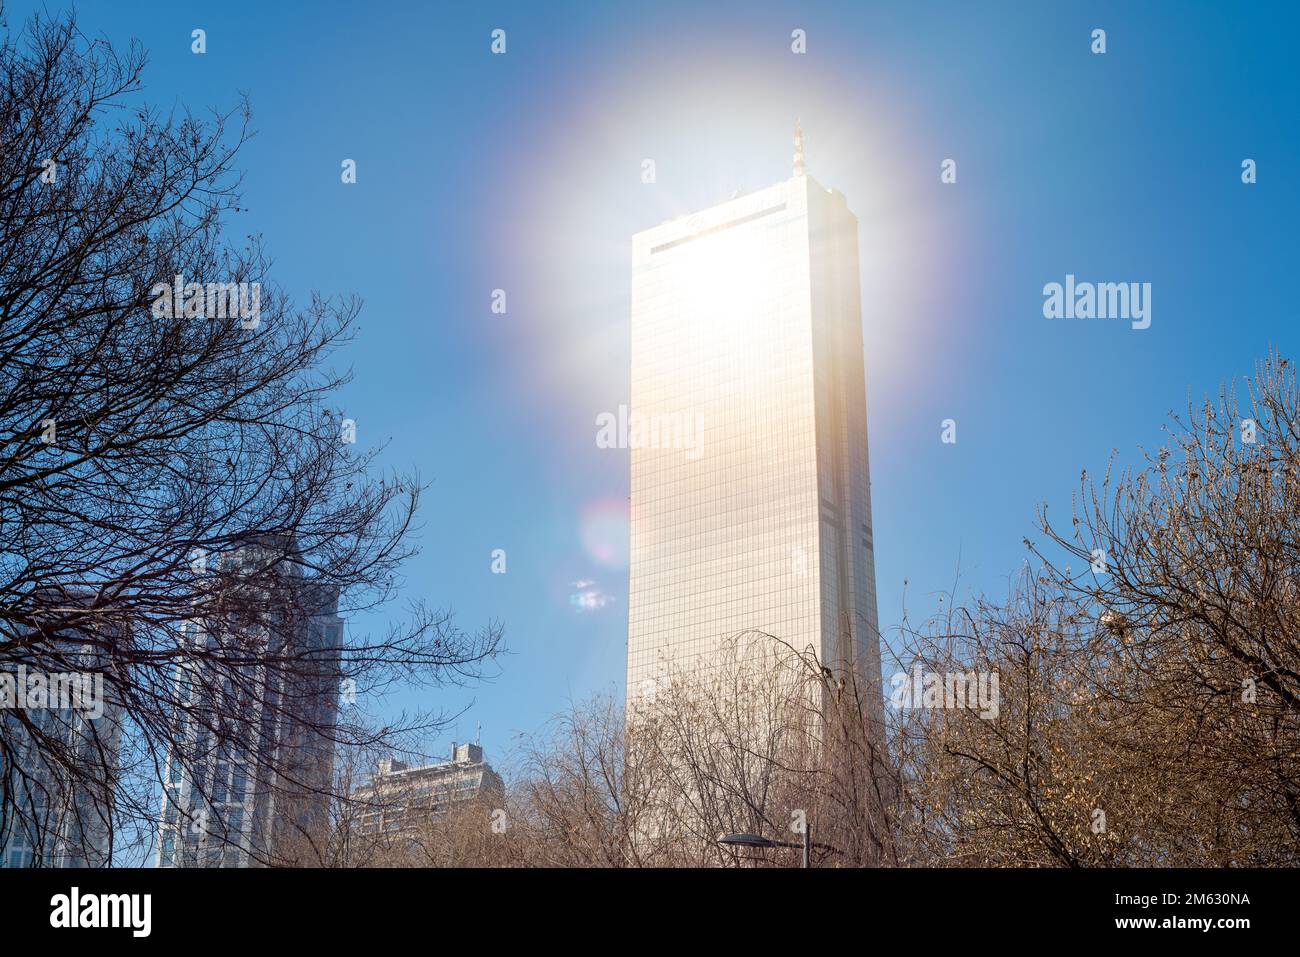 Sunlight reflecting from the gold-tinted glass of the 63 Square building skyscraper on Yeouido island in Seoul, South Korea on 1 January 2023 Stock Photo